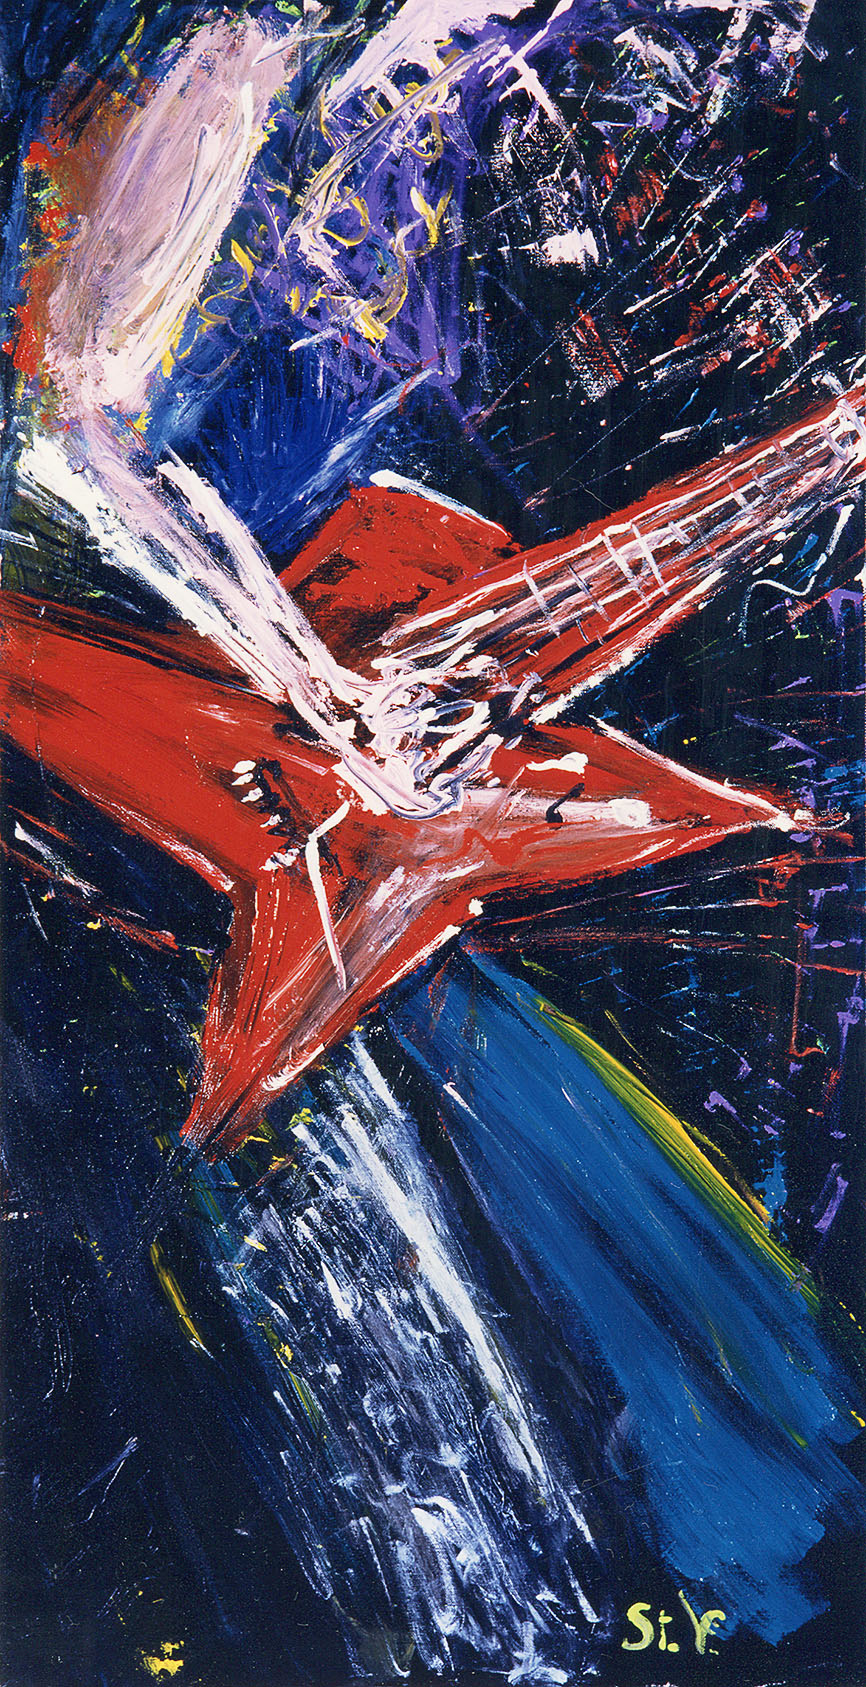 RED GUITAR - 1993 - 60x120cm. - arcylic on canvas